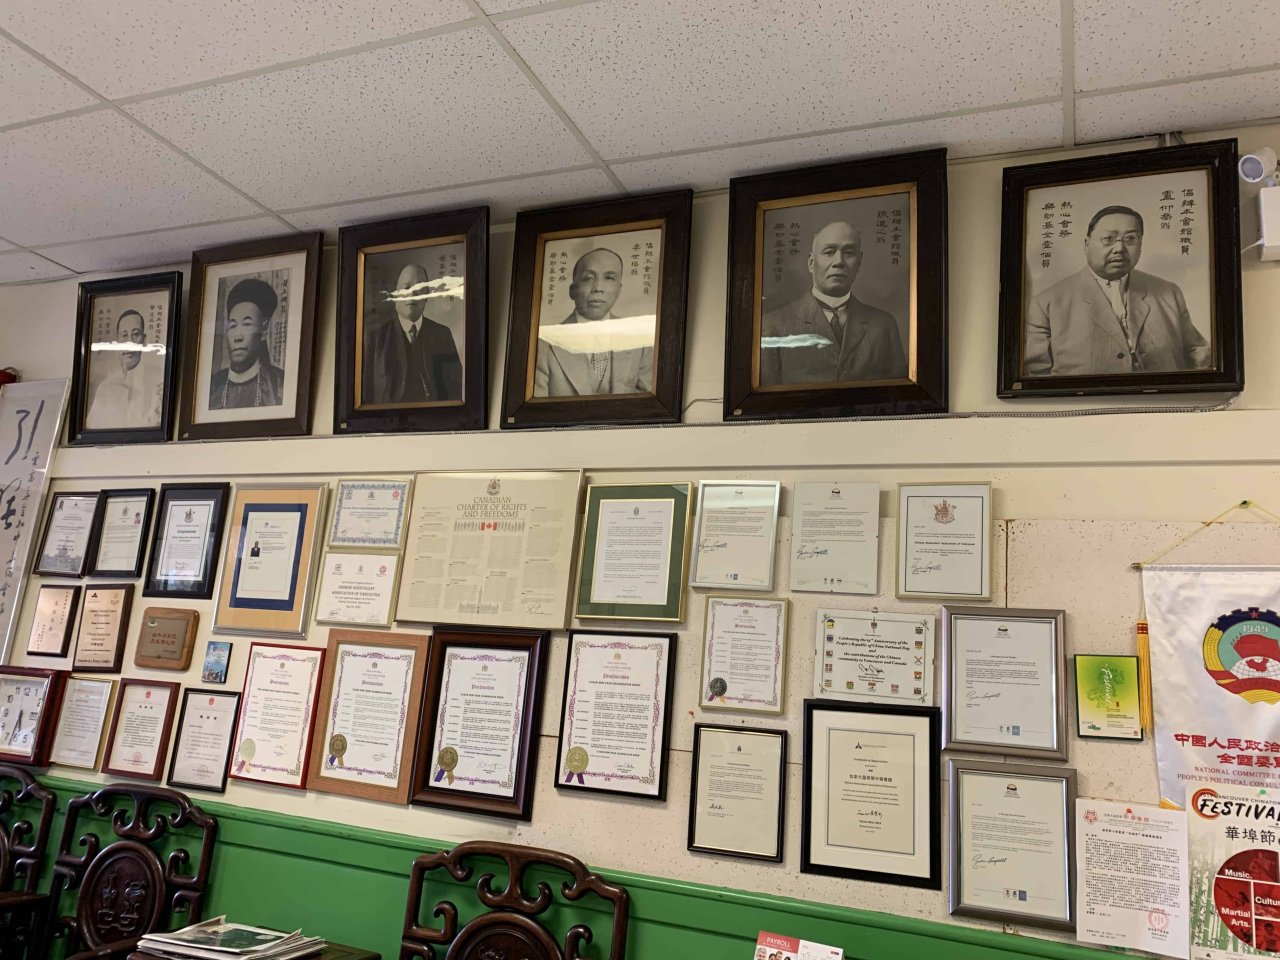 Photos of past presidents of the Chinese Benevolent Association. Photo Credit: Yahe Li